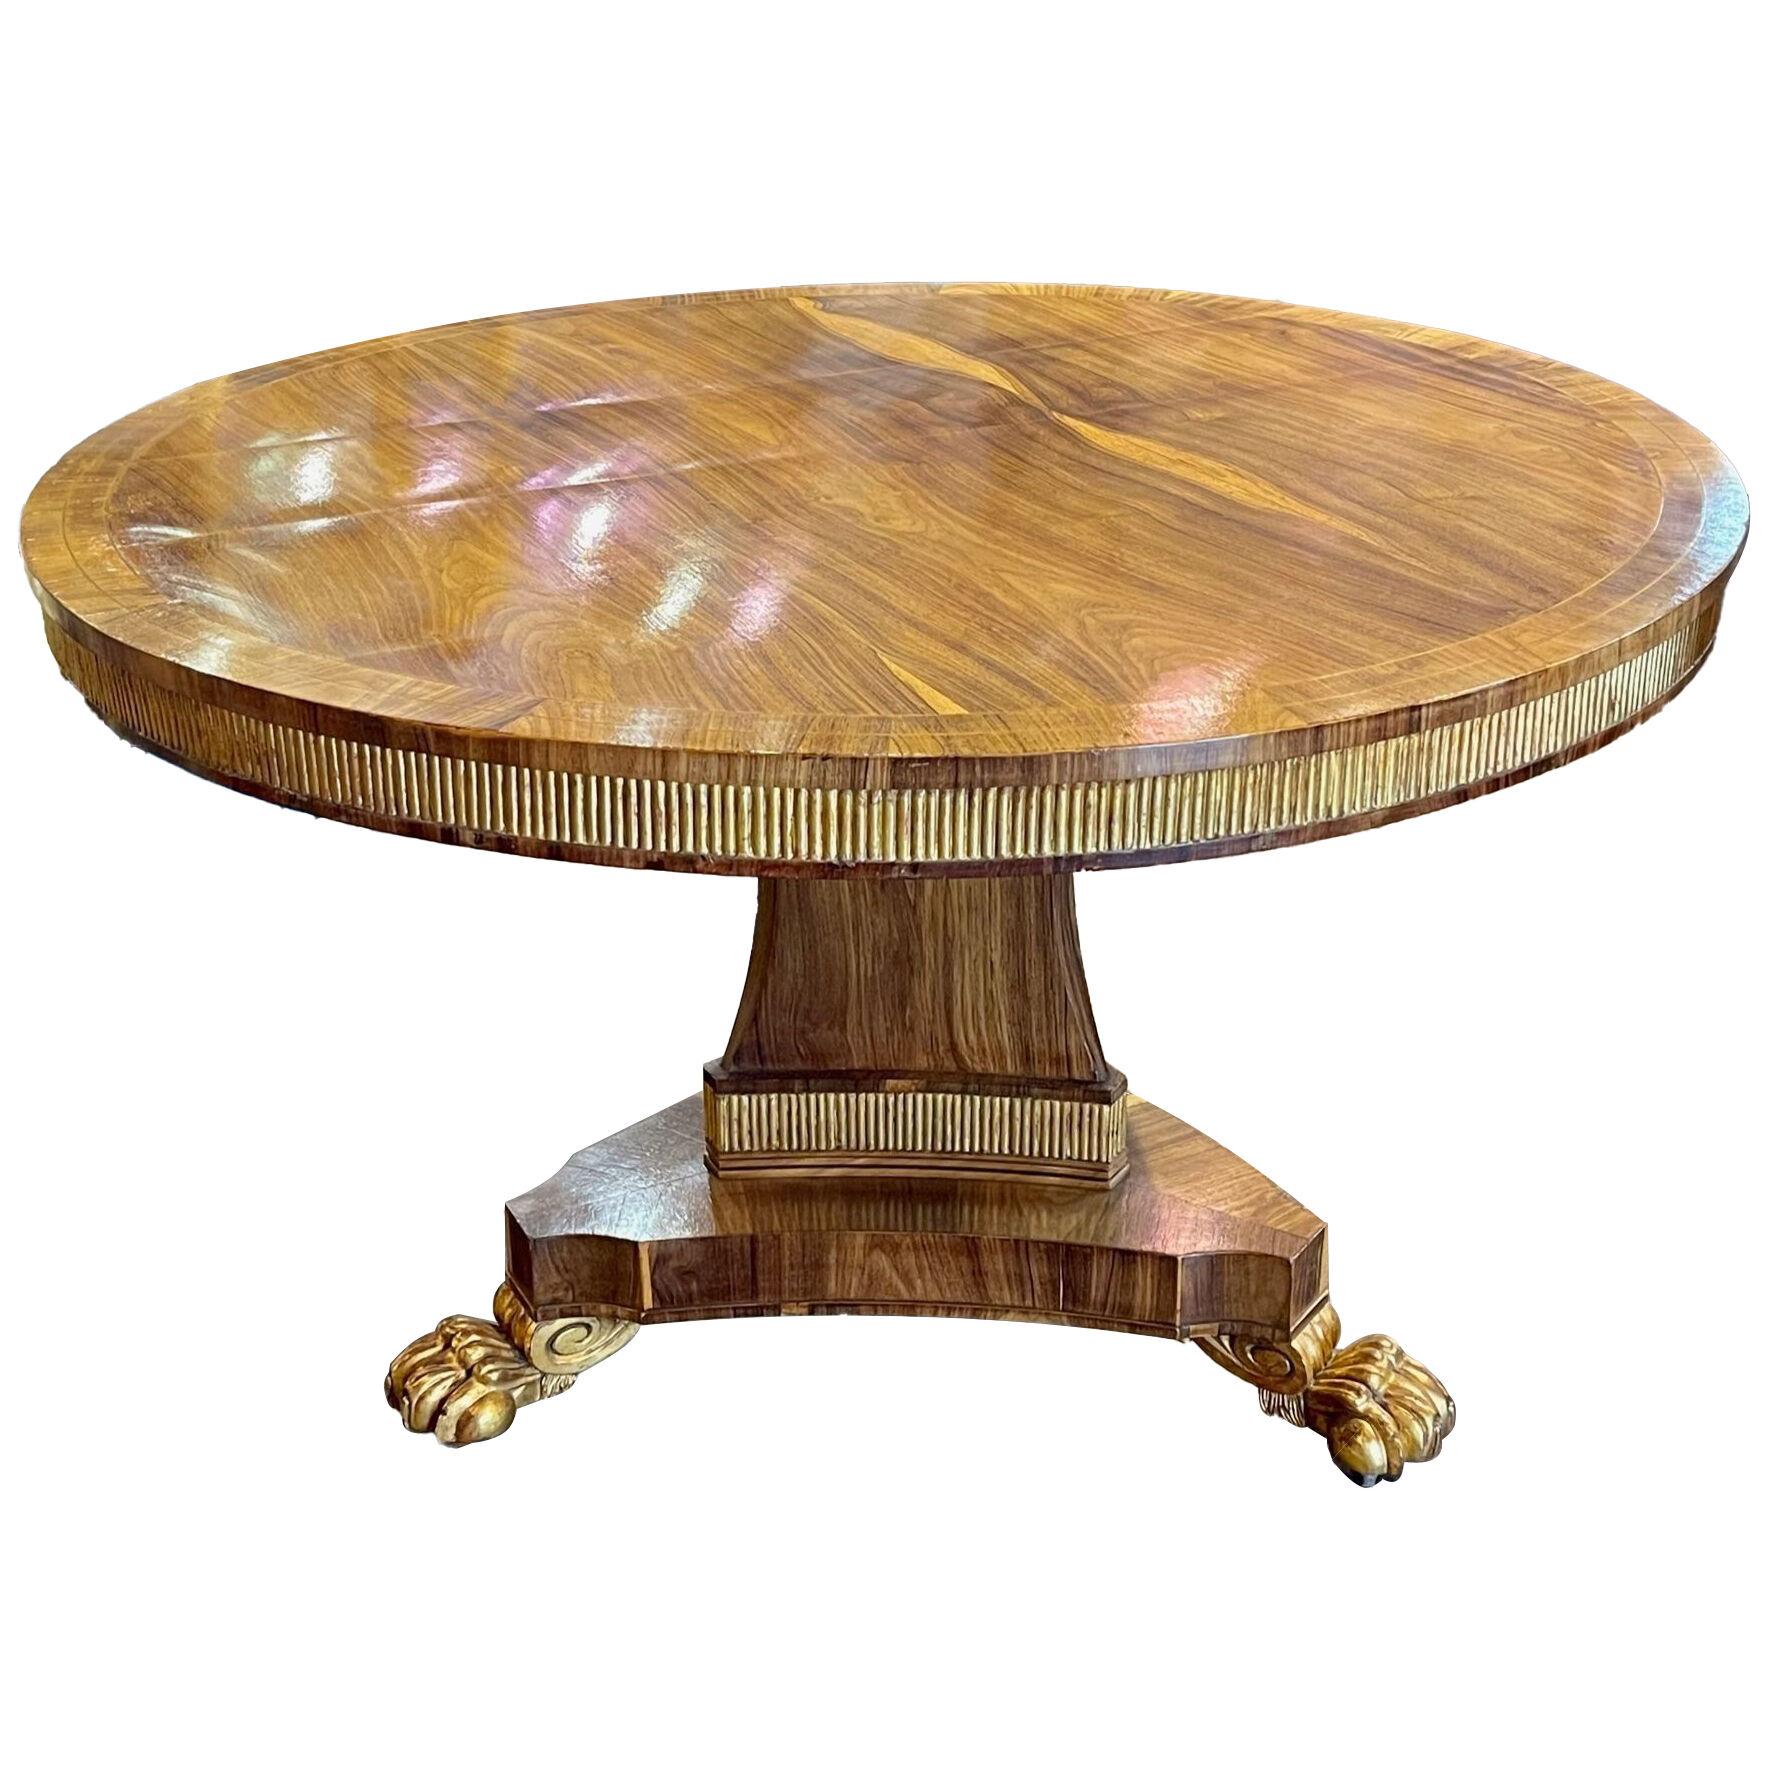 19th Century English Regency Rosewood and Gilded Center Table